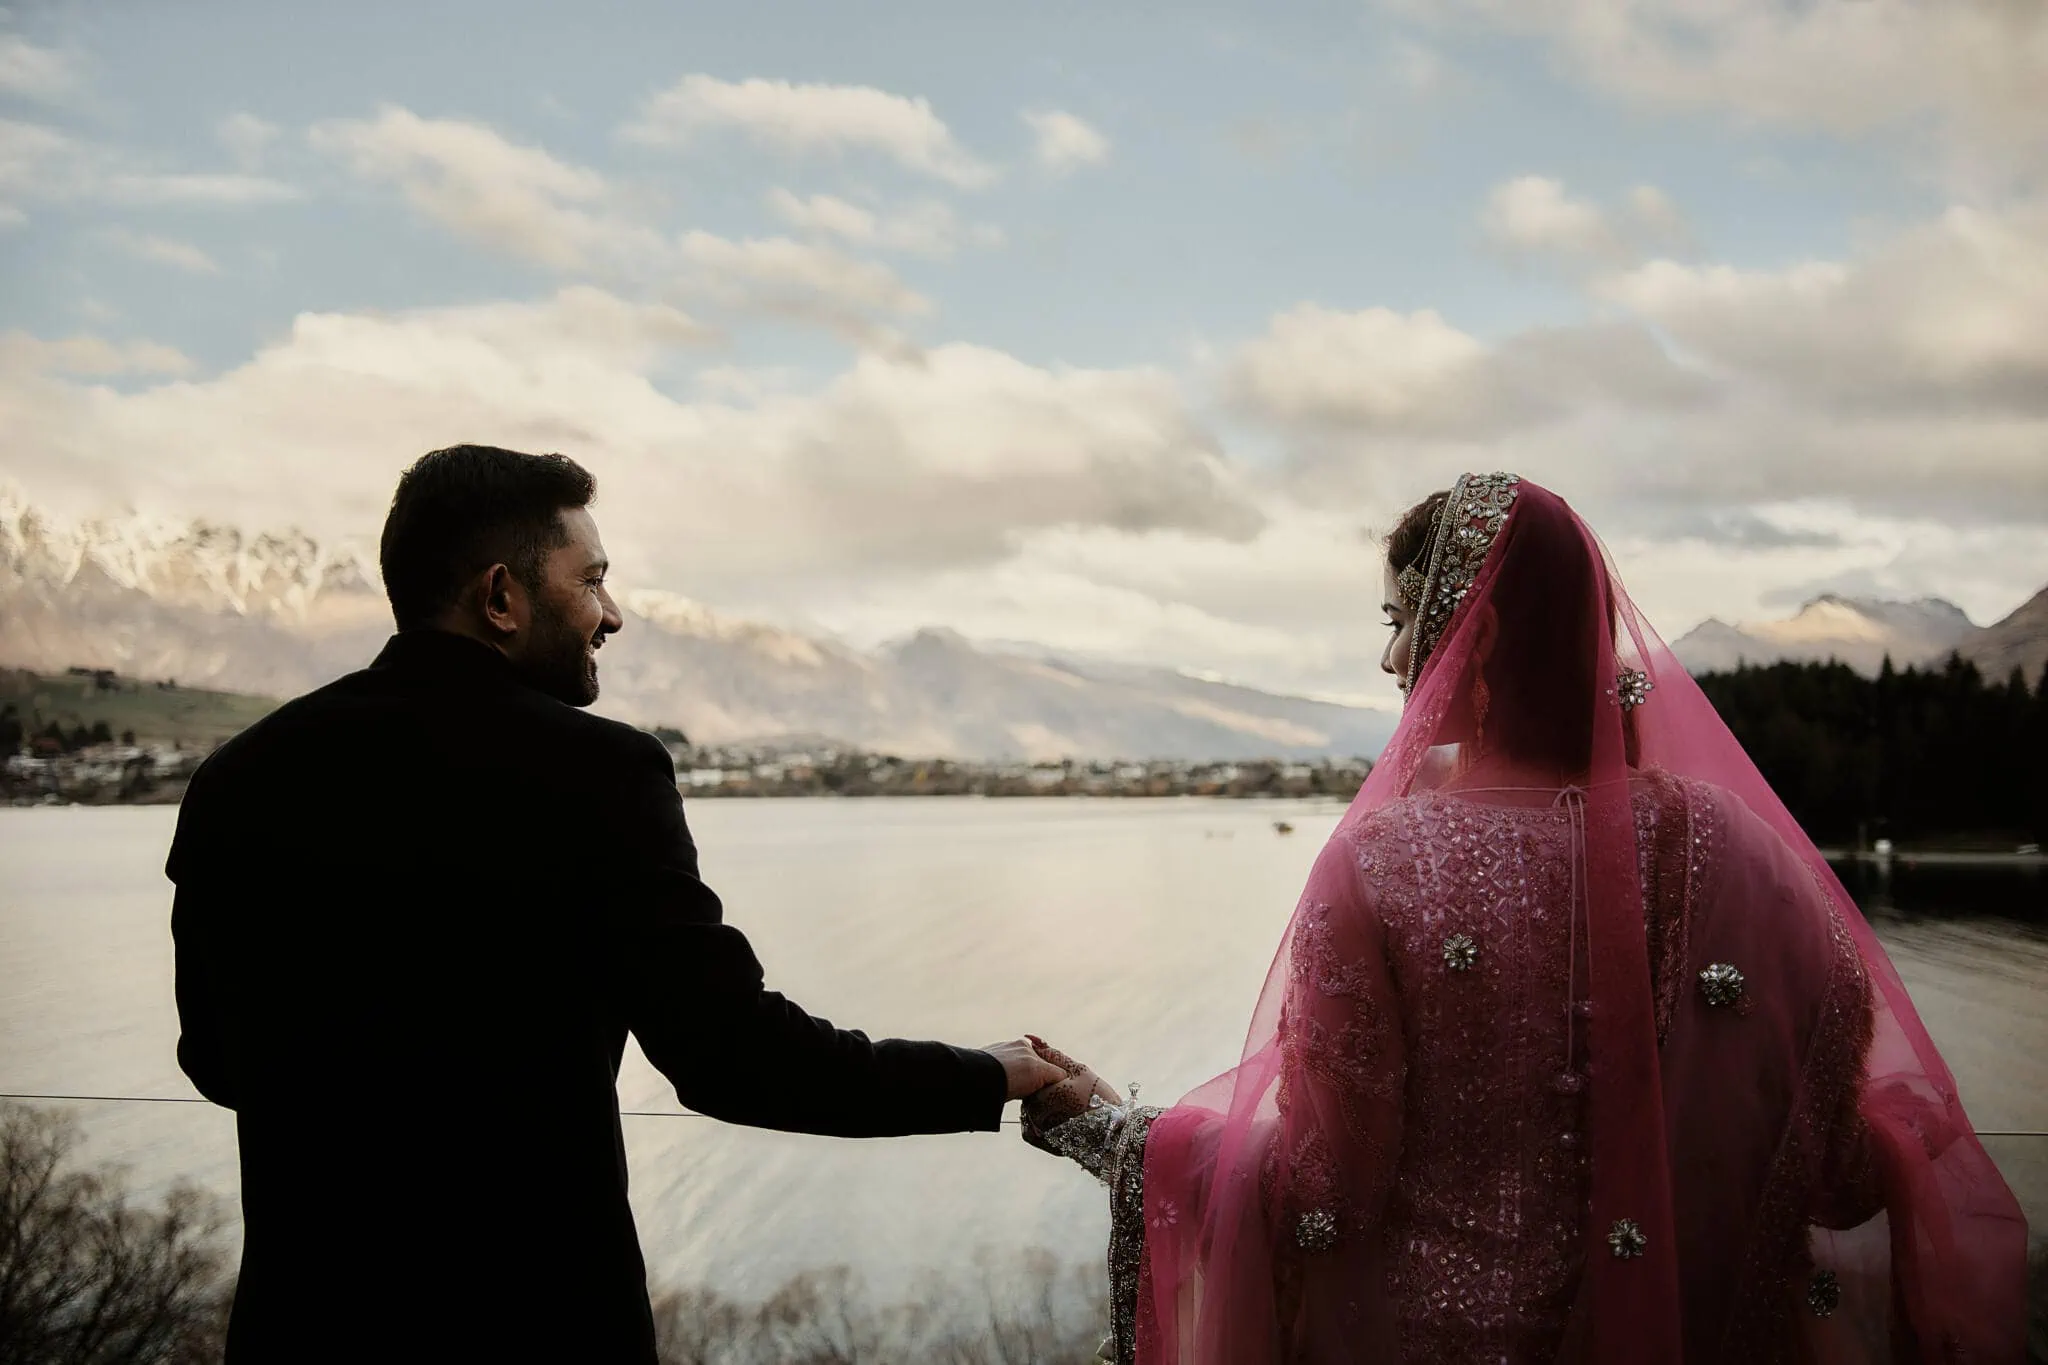 Queenstown New Zealand Elopement Wedding Photographer - Wasim and Yumn's Queenstown Islamic Wedding: A bride and groom holding hands in front of a lake.